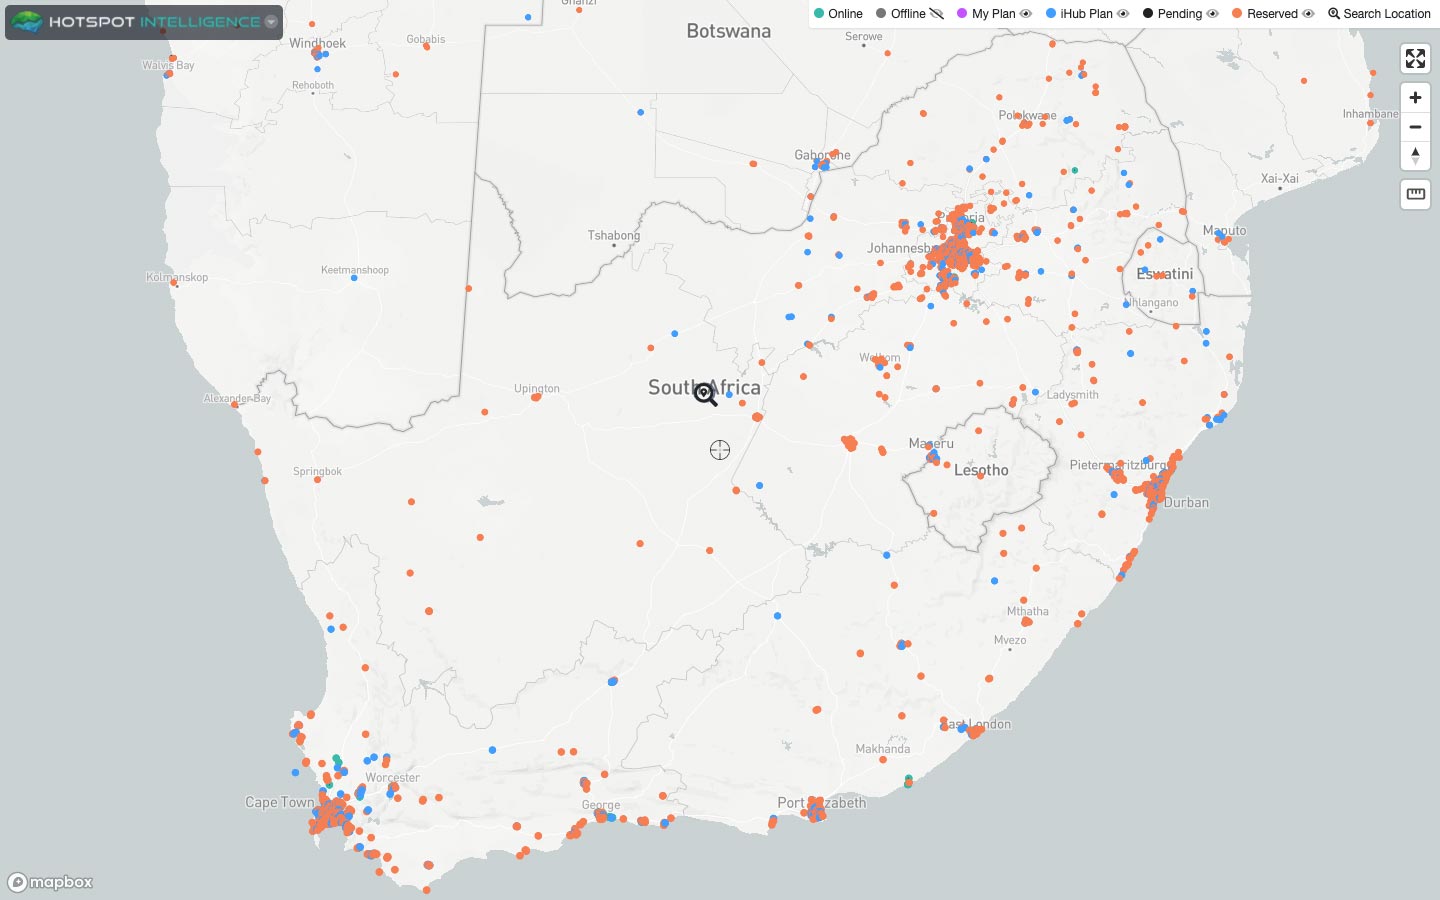 Available Helium Mining Hotspots Near South Africa